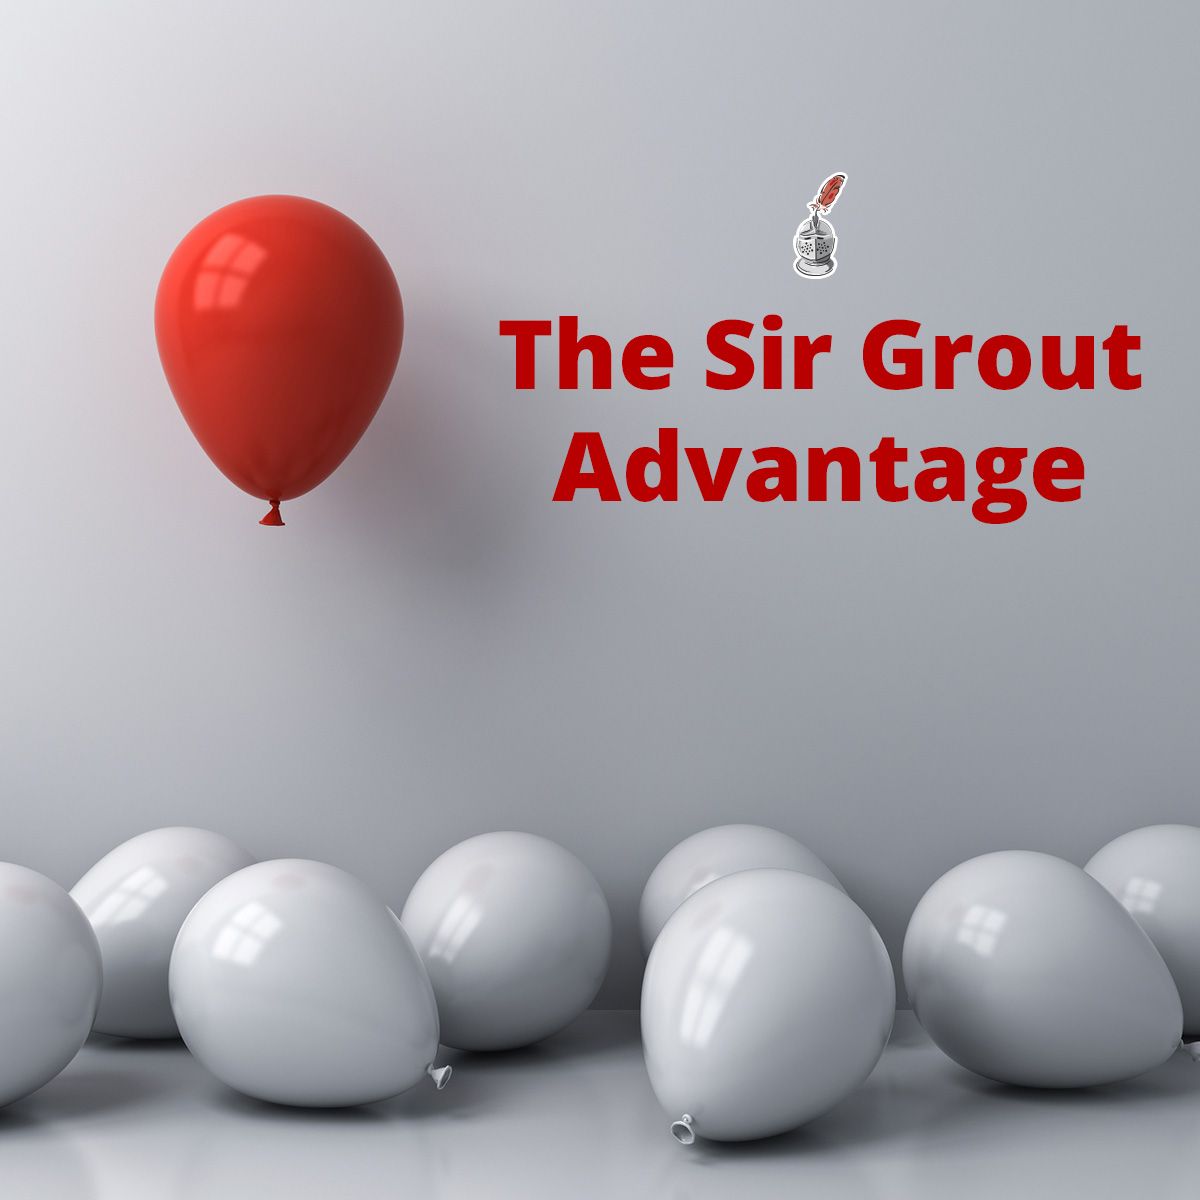 The Sir Grout Advantage